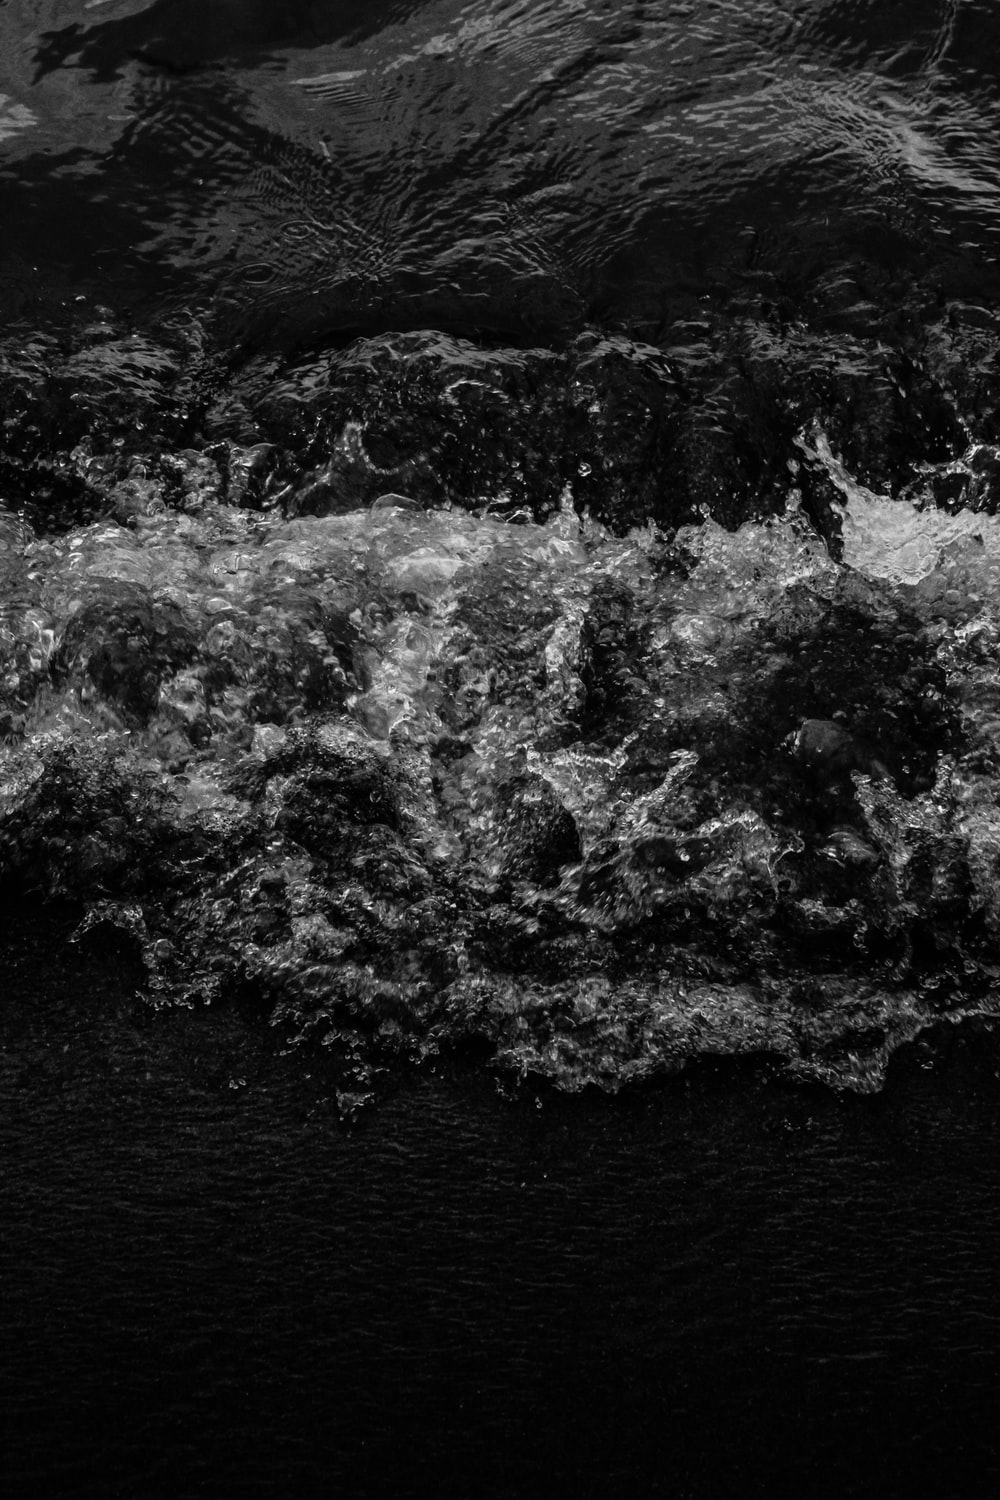 Black And White Waves Picture. Download Free Image